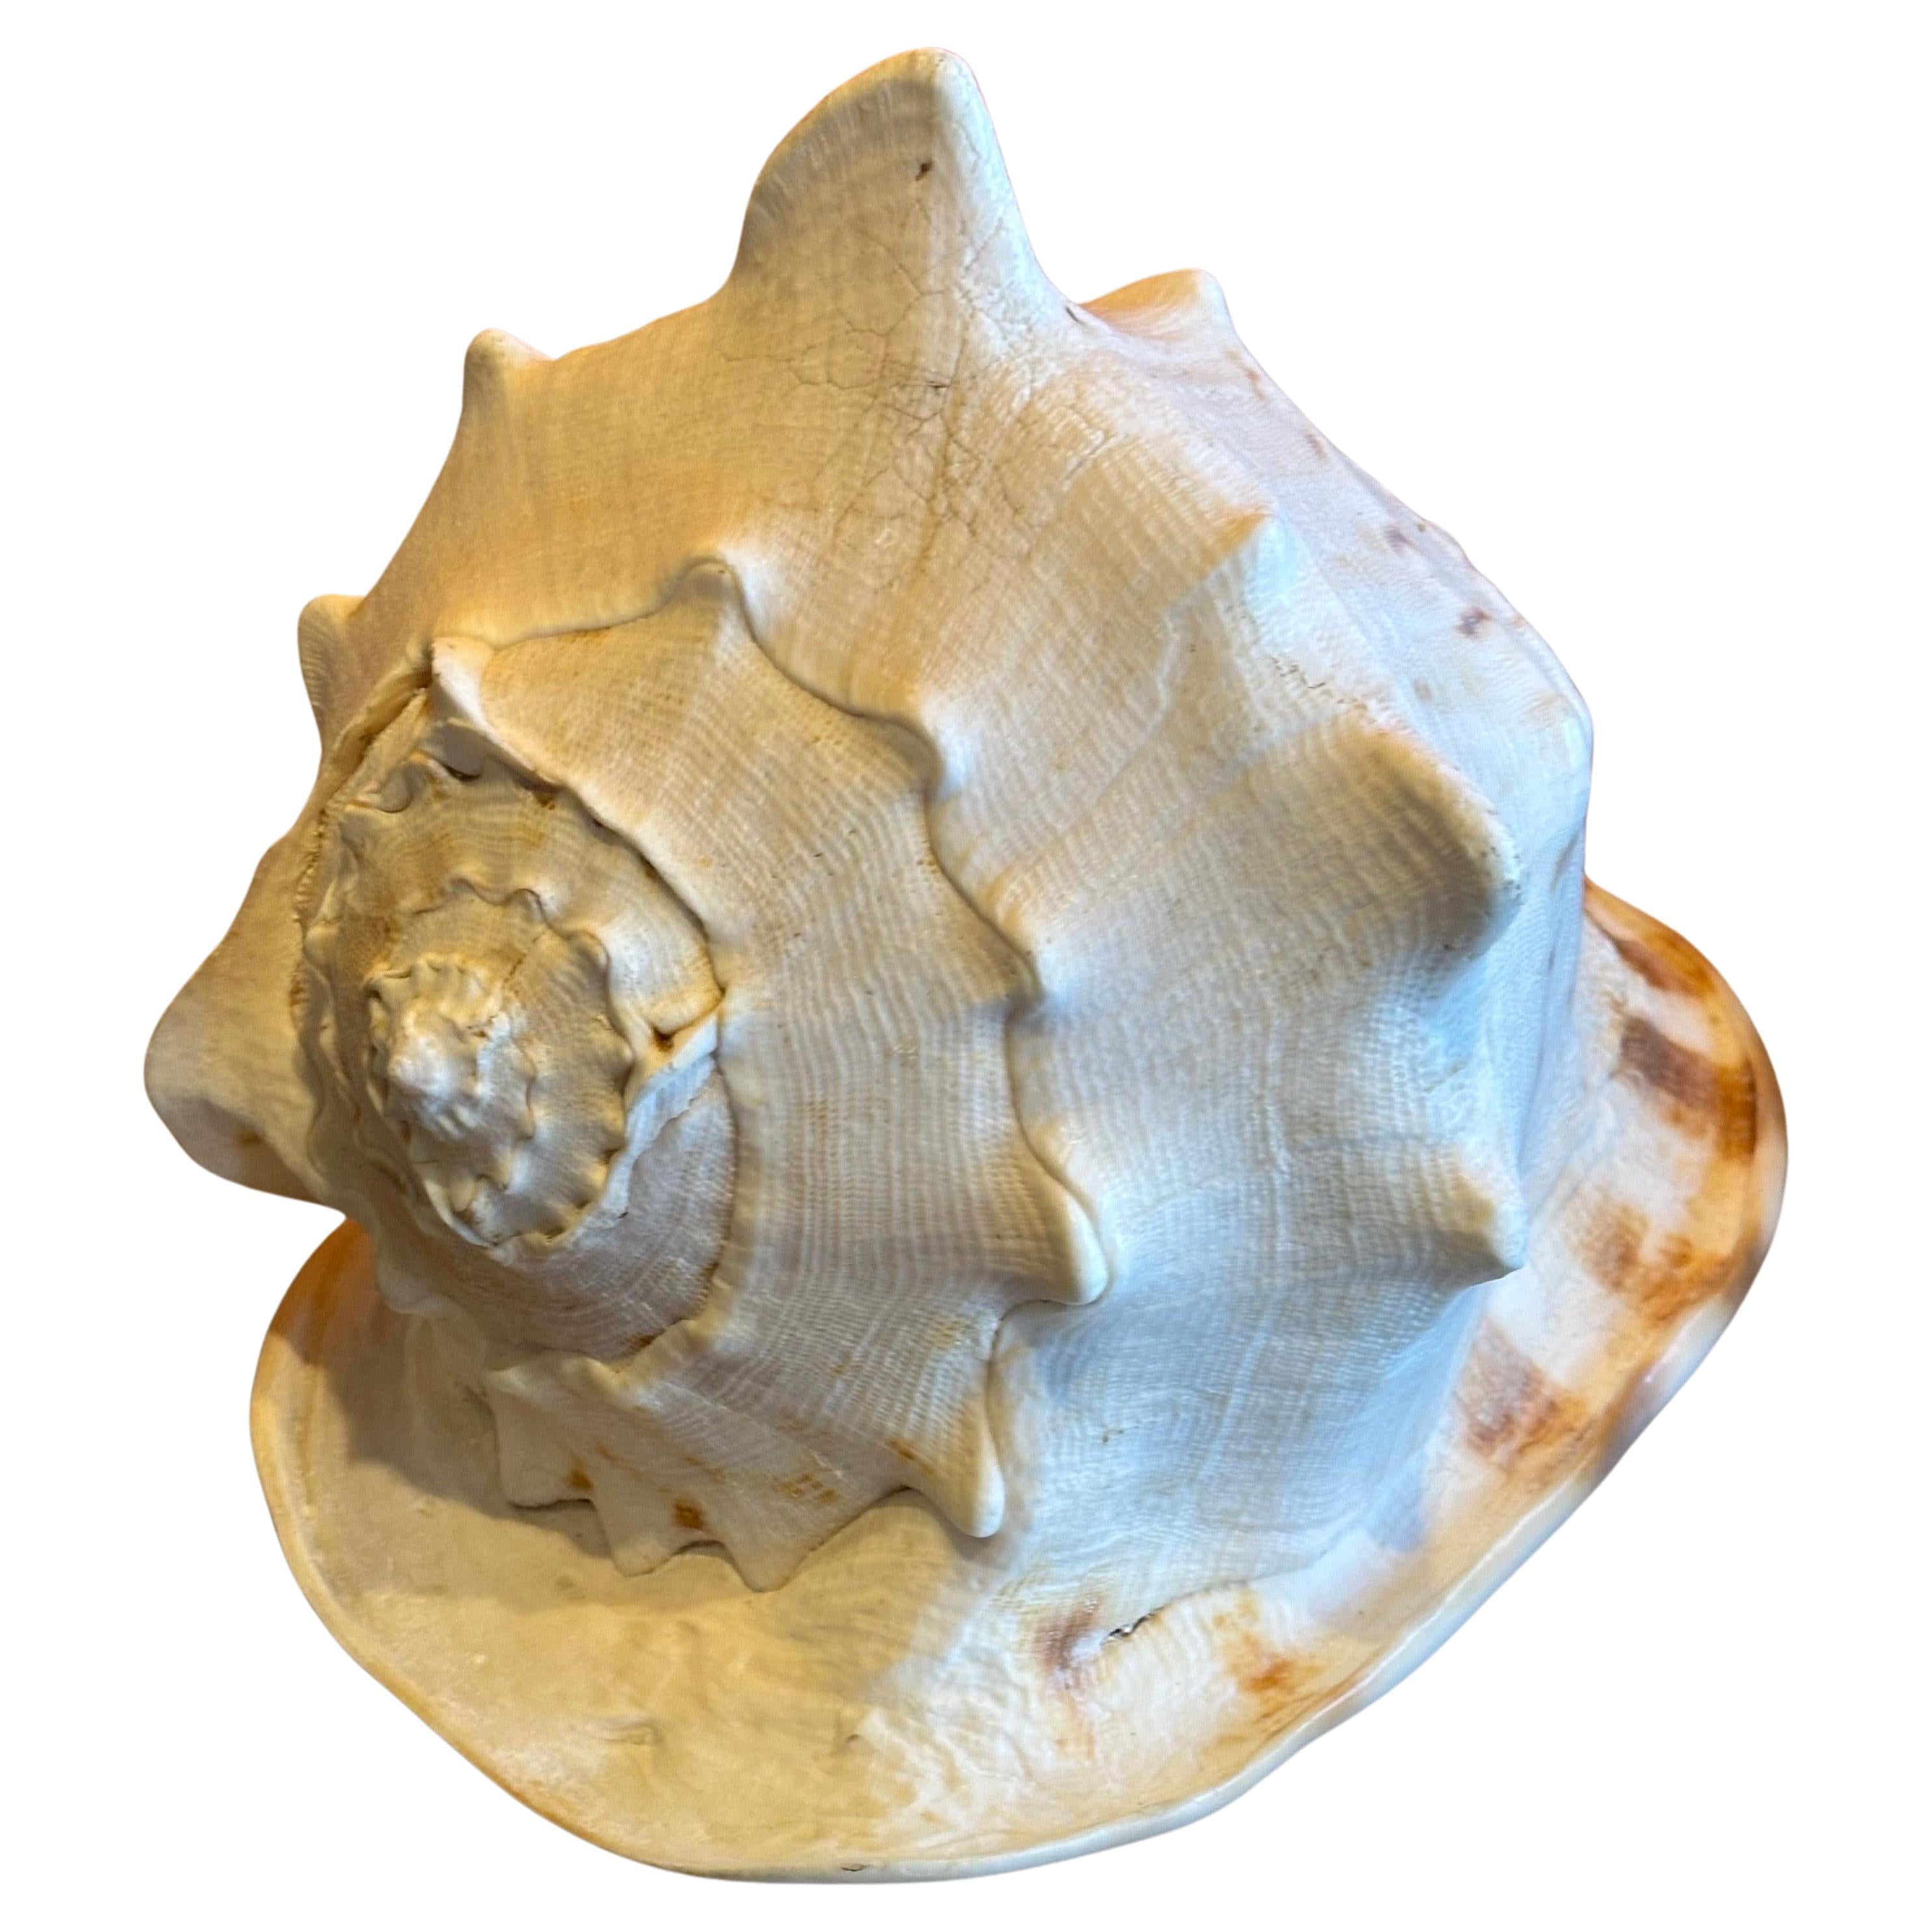 A massive conch shell from the Pacific Ocean, circa 1970s. The piece is in great condition and measures a substantial 11